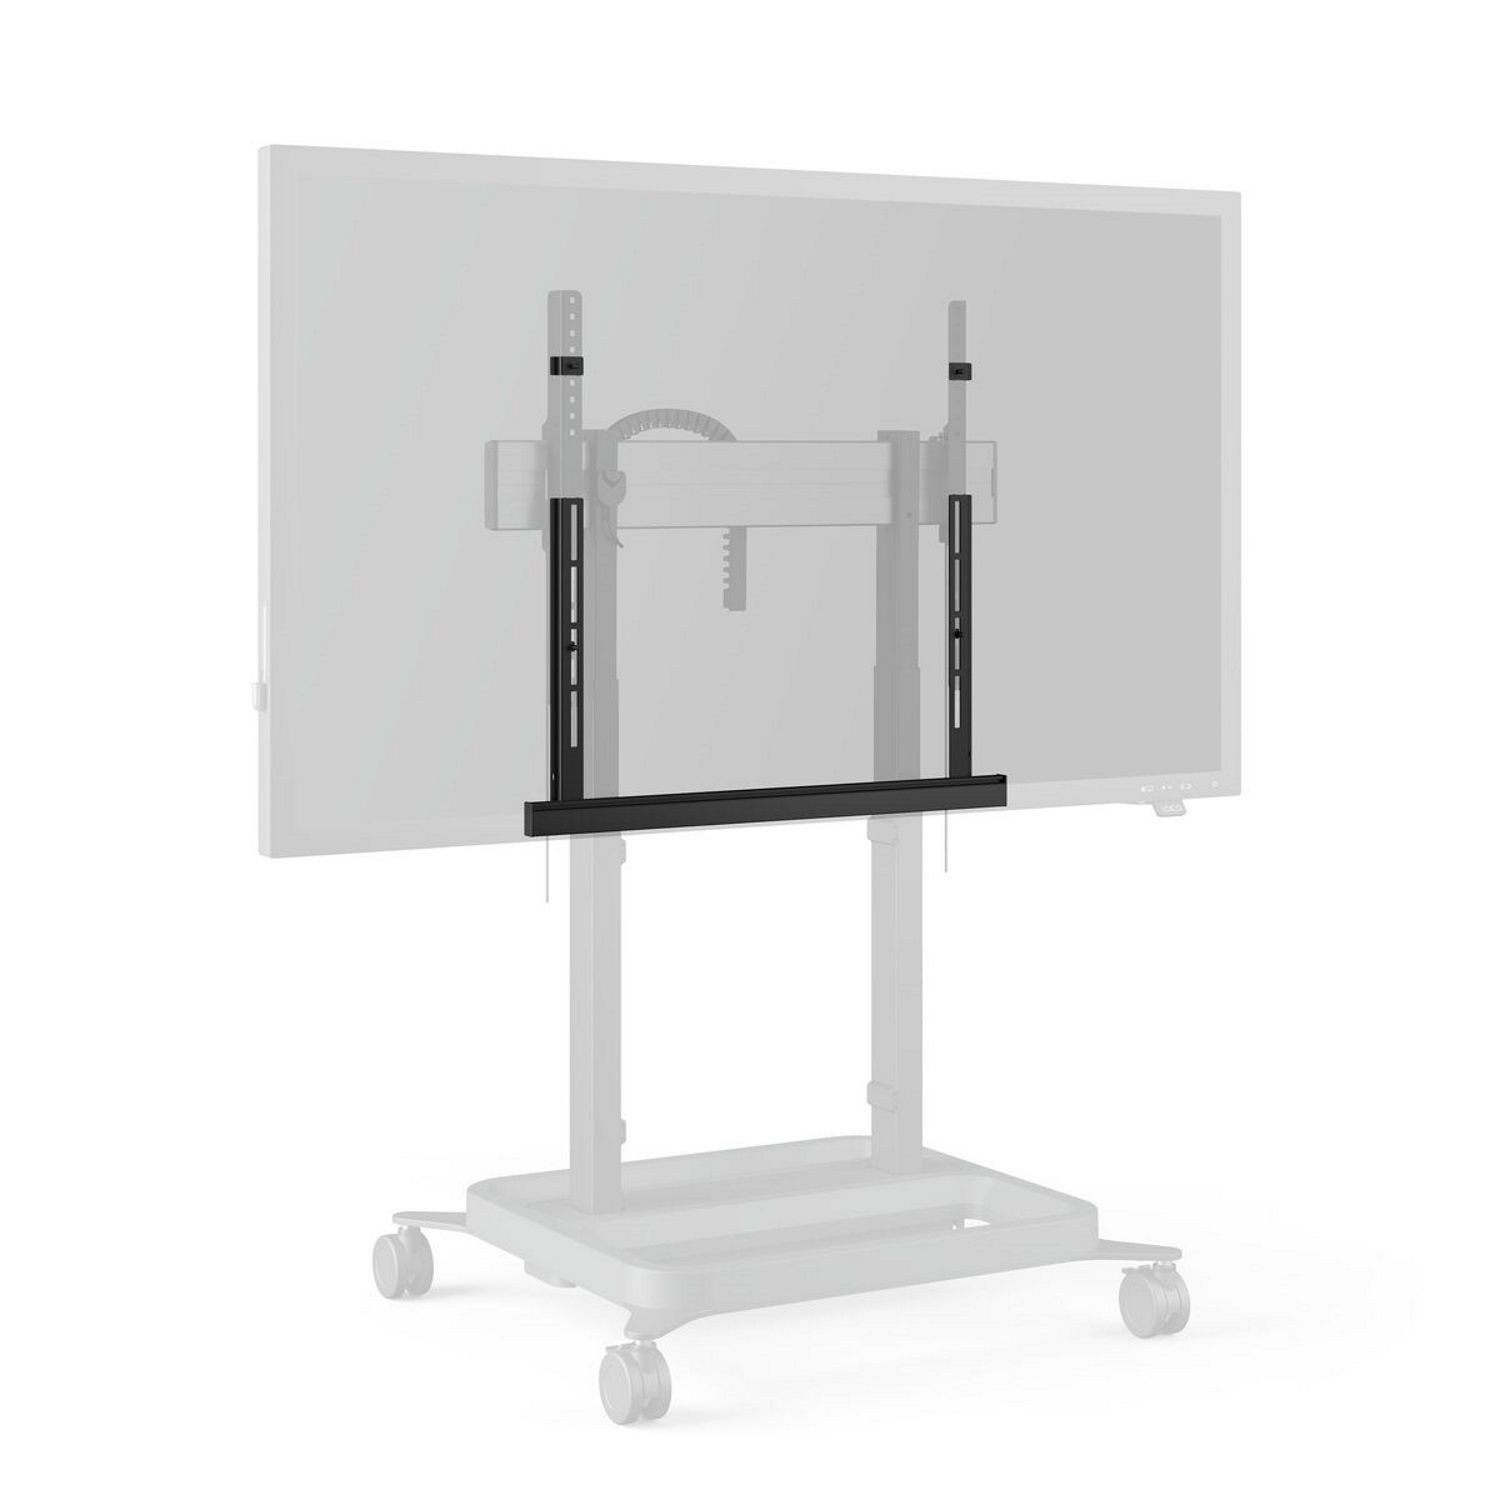 Vogels-RISE-A111-Adapter-Display-Lift